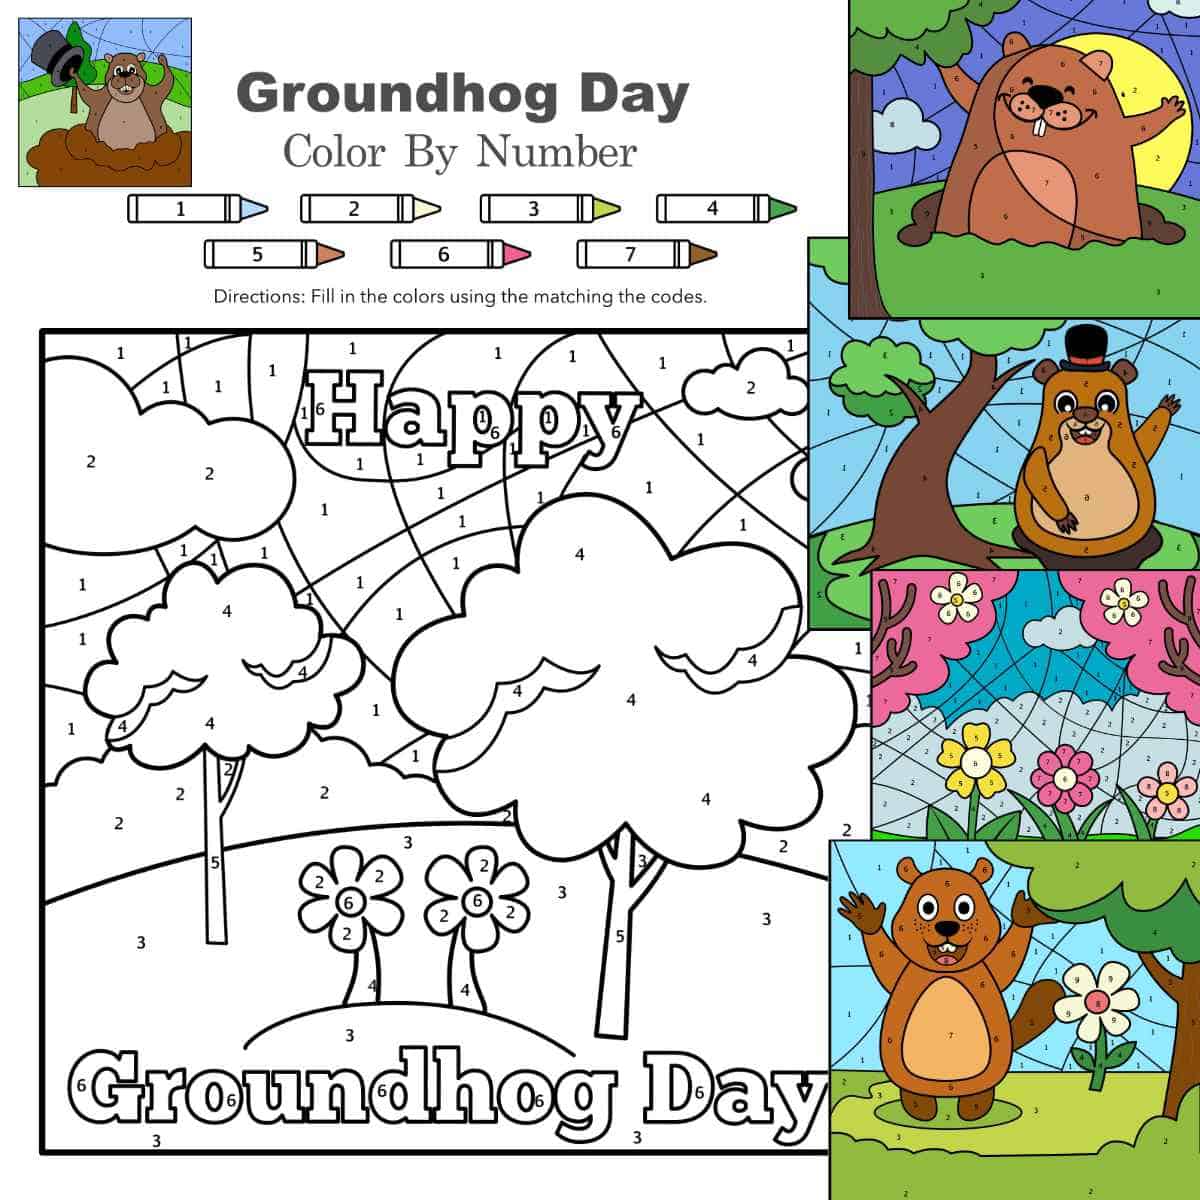 Color by number printables of Groundhog Day.